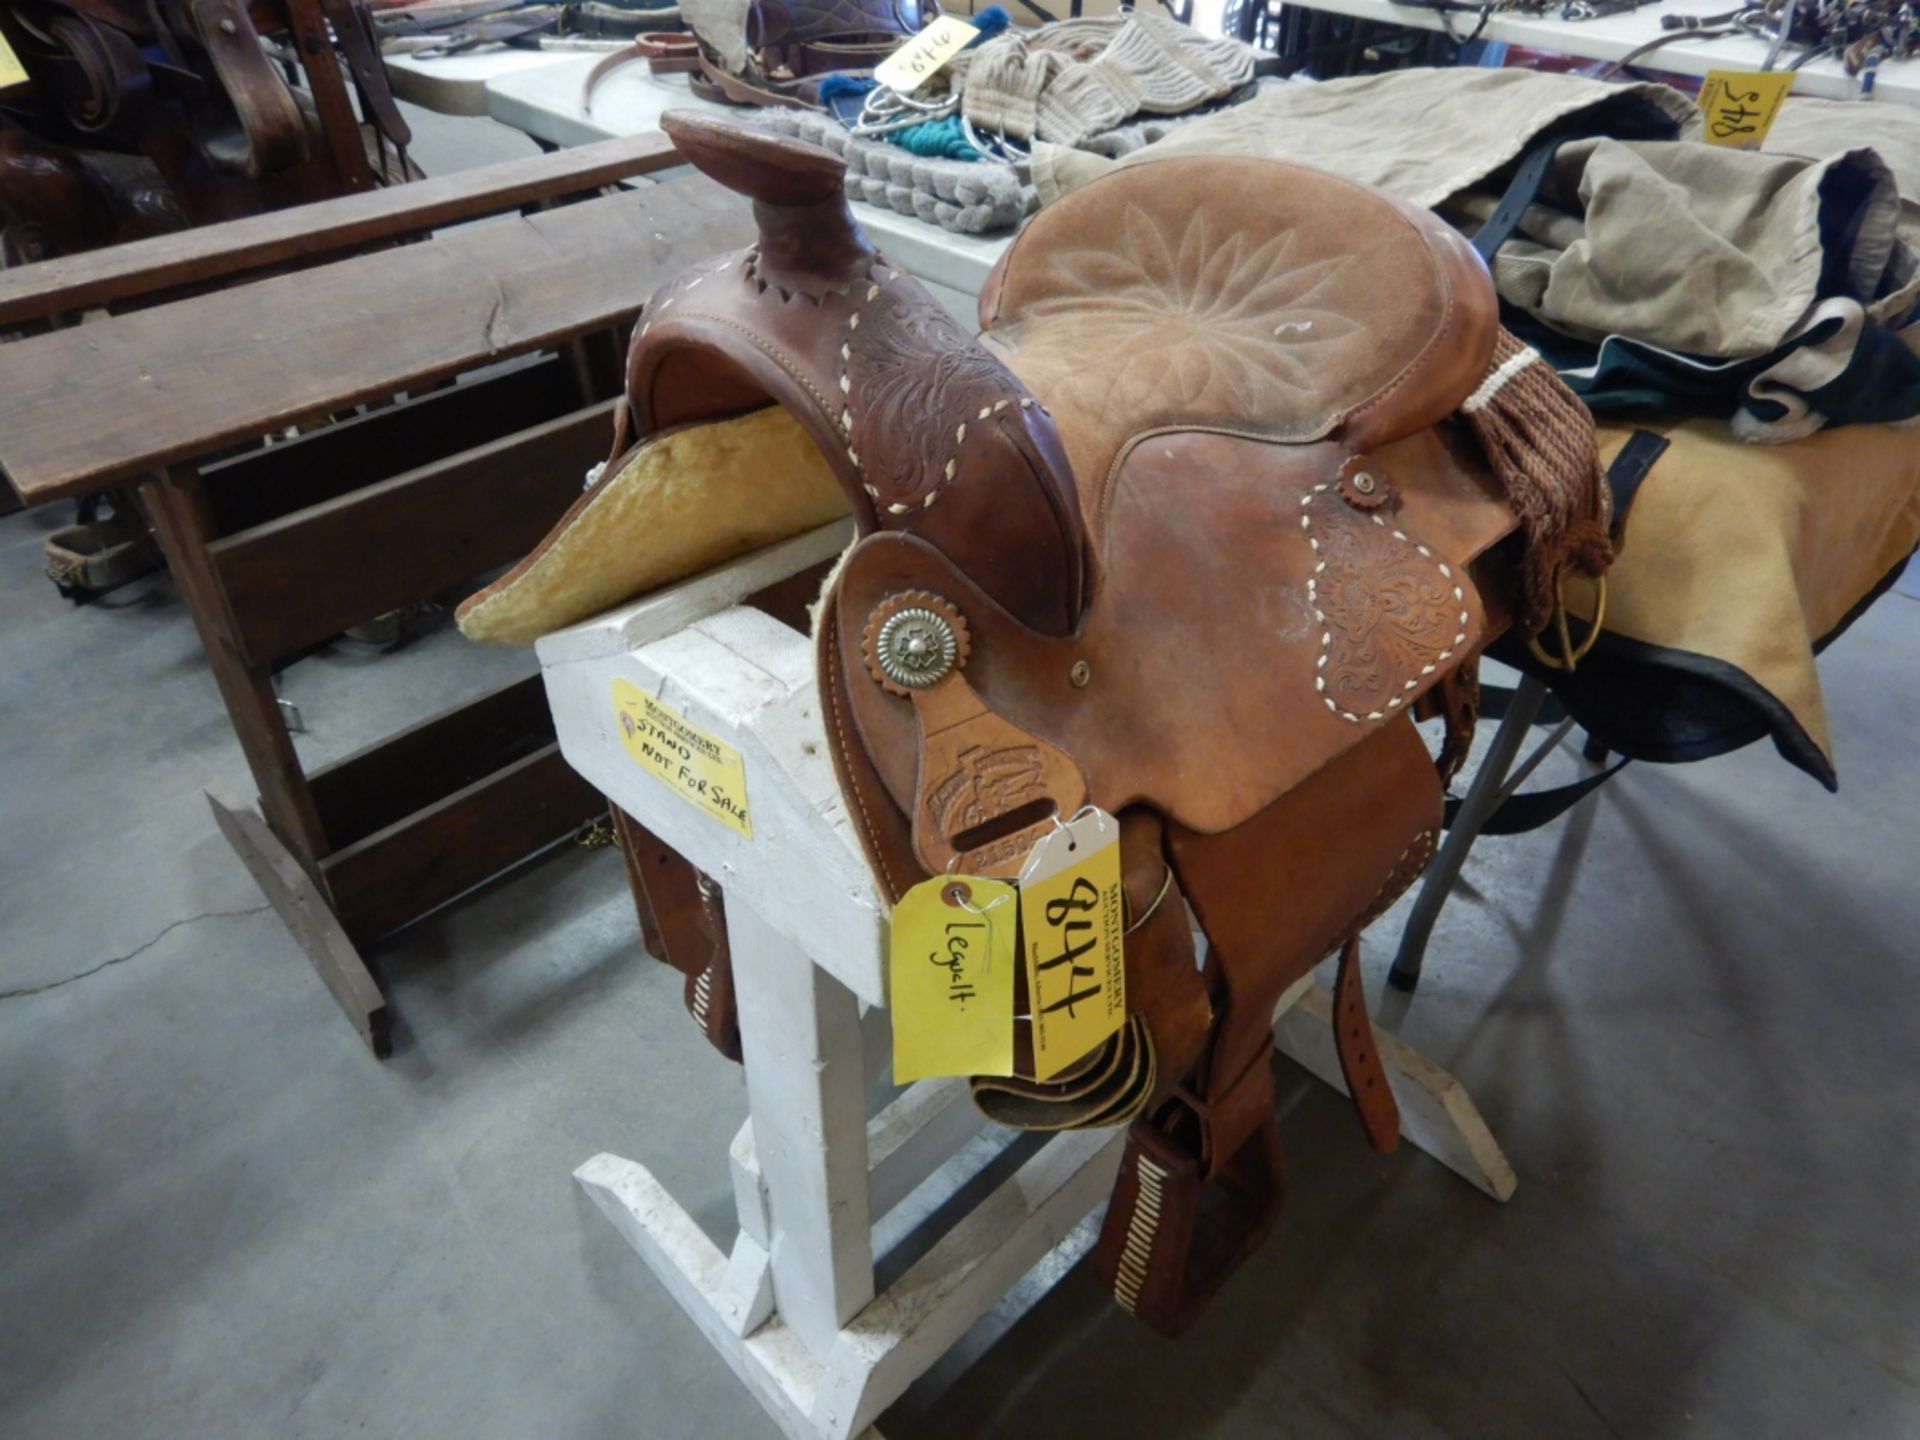 SOMETHING COMPANY 21504 .3 STOCK SADDLE 15 INCH SEAT, 13 INCH FORK, FULL RIG